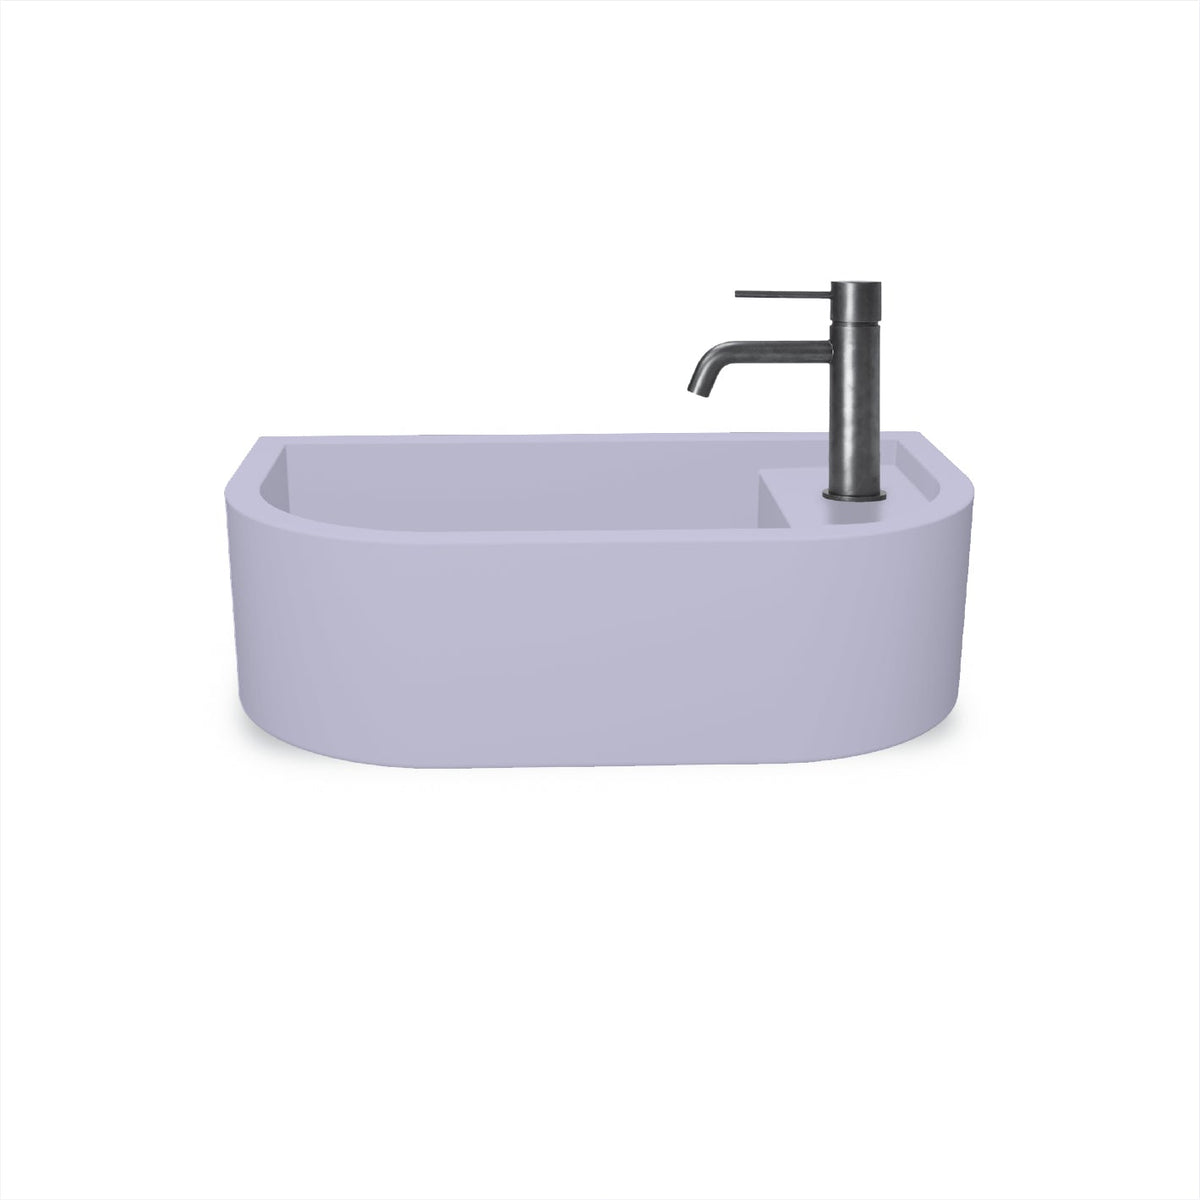 Loop 01 Basin - Overflow - Surface Mount (Lilac,Tap Hole,Chrome)